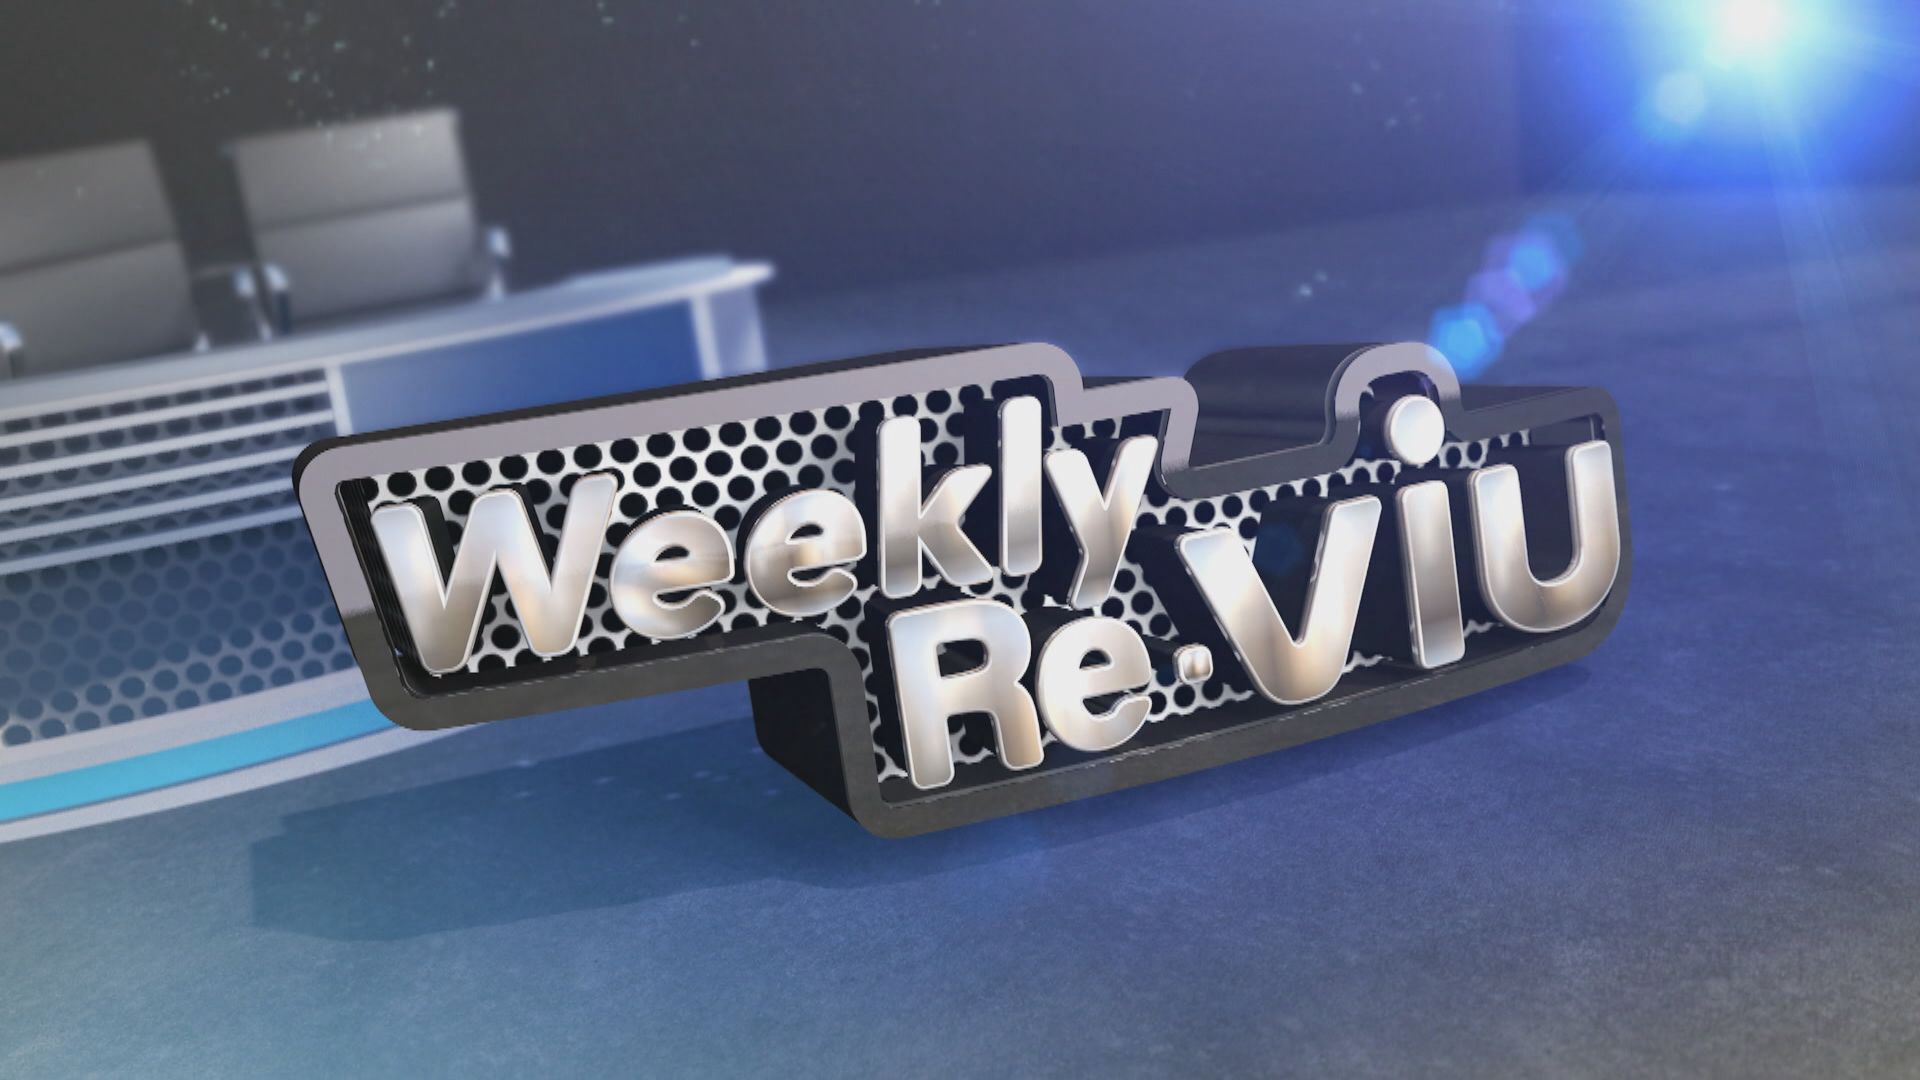 Weekly ReViu | Part Two - Story Roundup (3.9.2022)